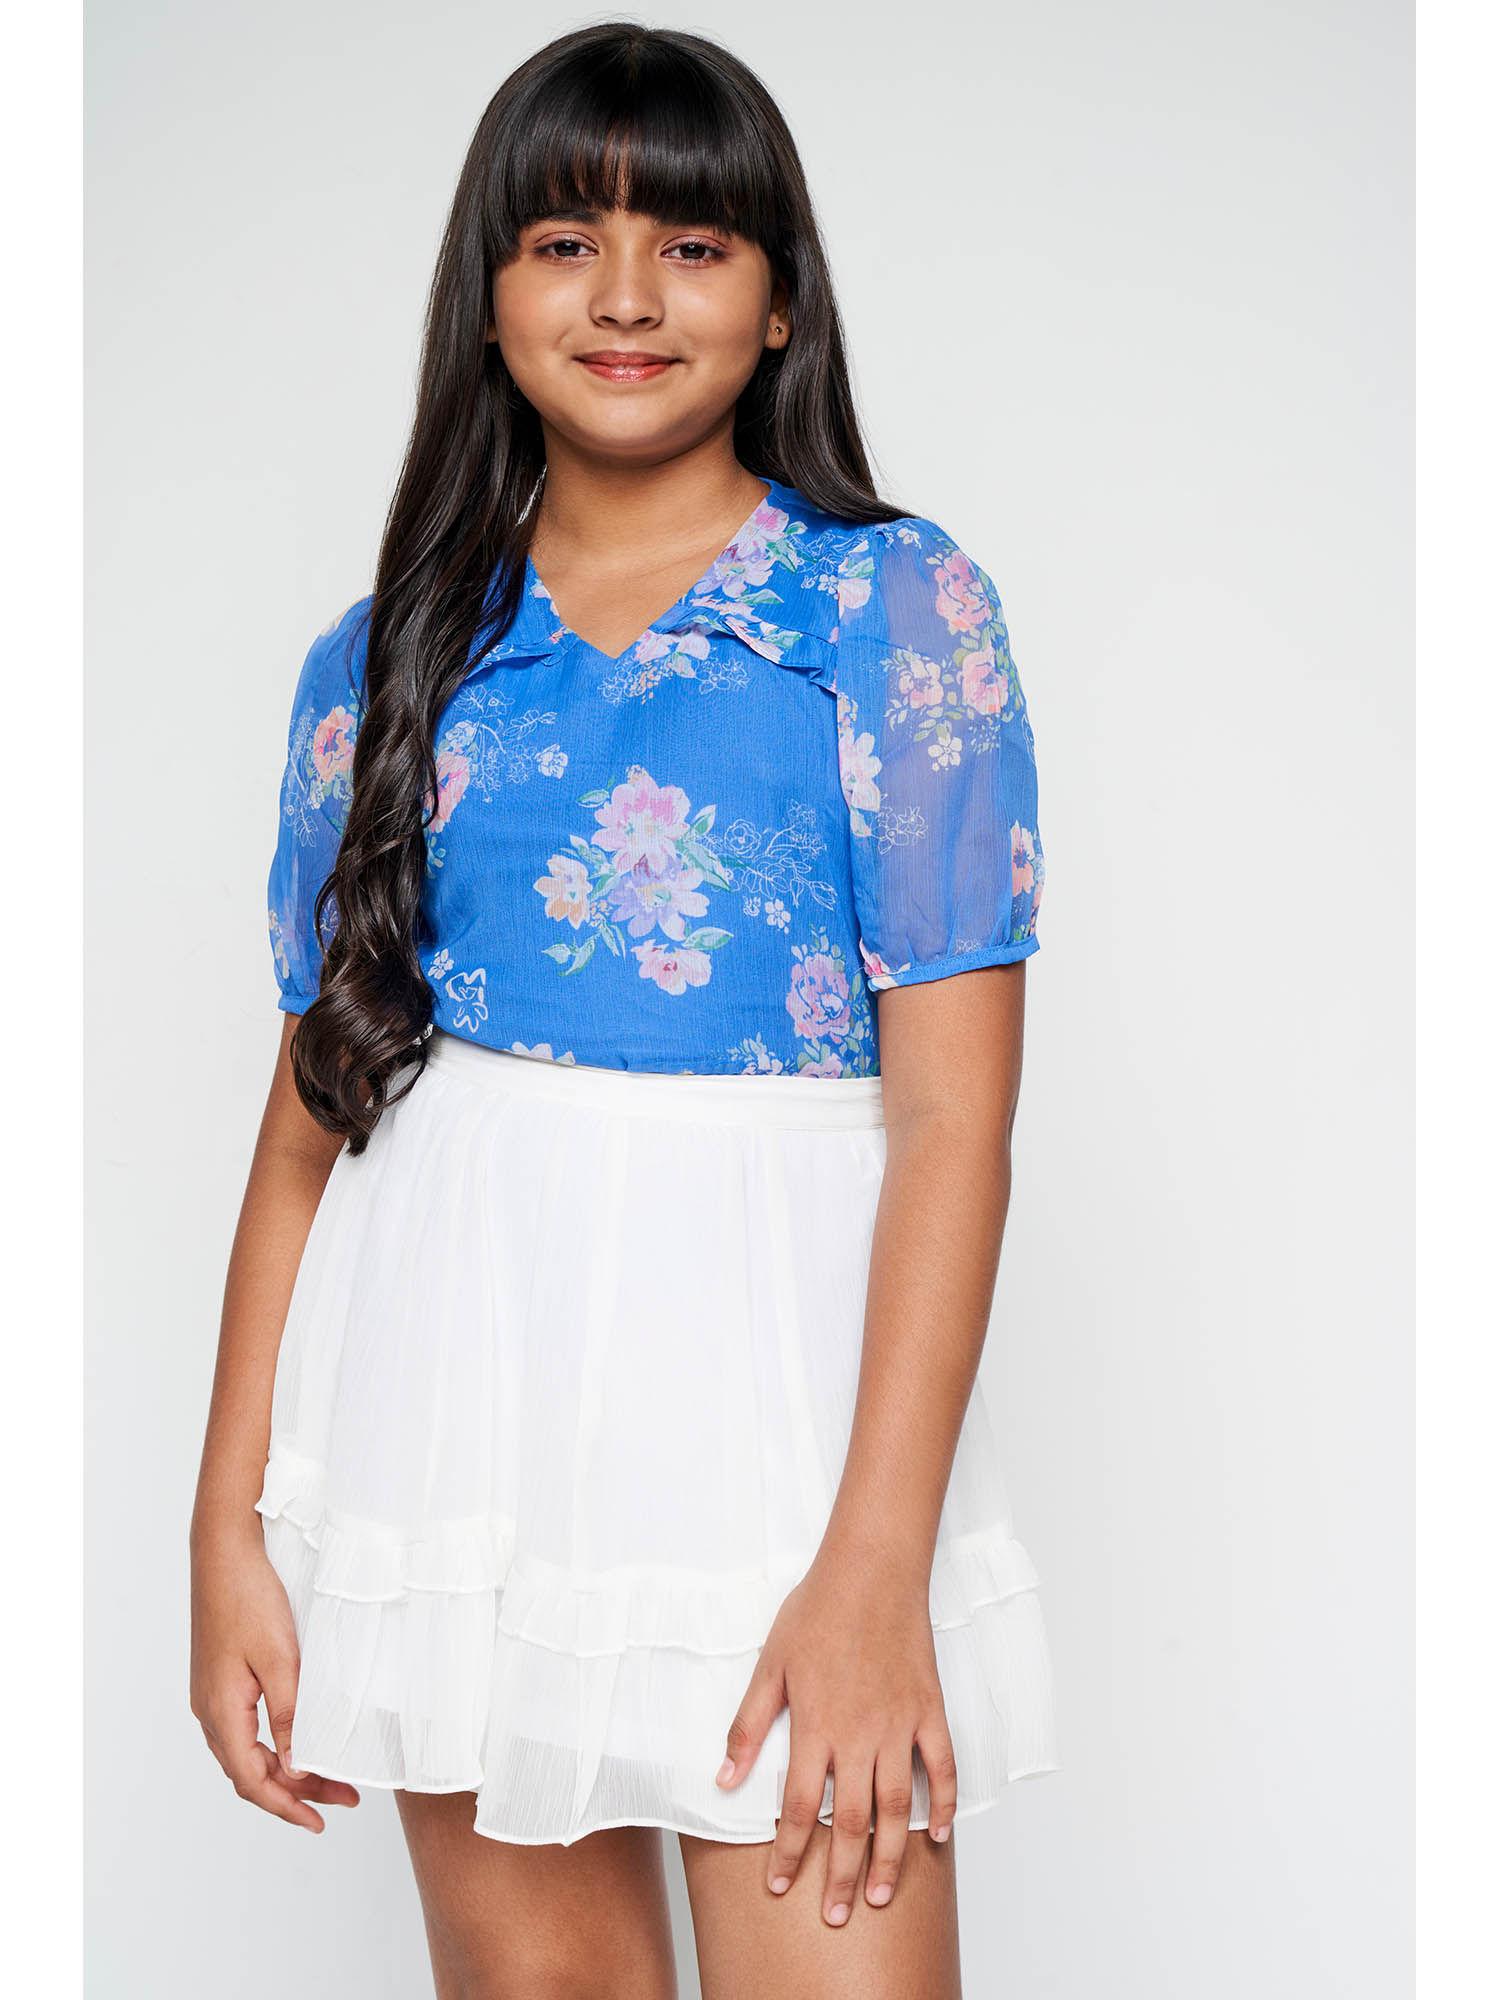 floral blue casual top and skirt (set of 2)